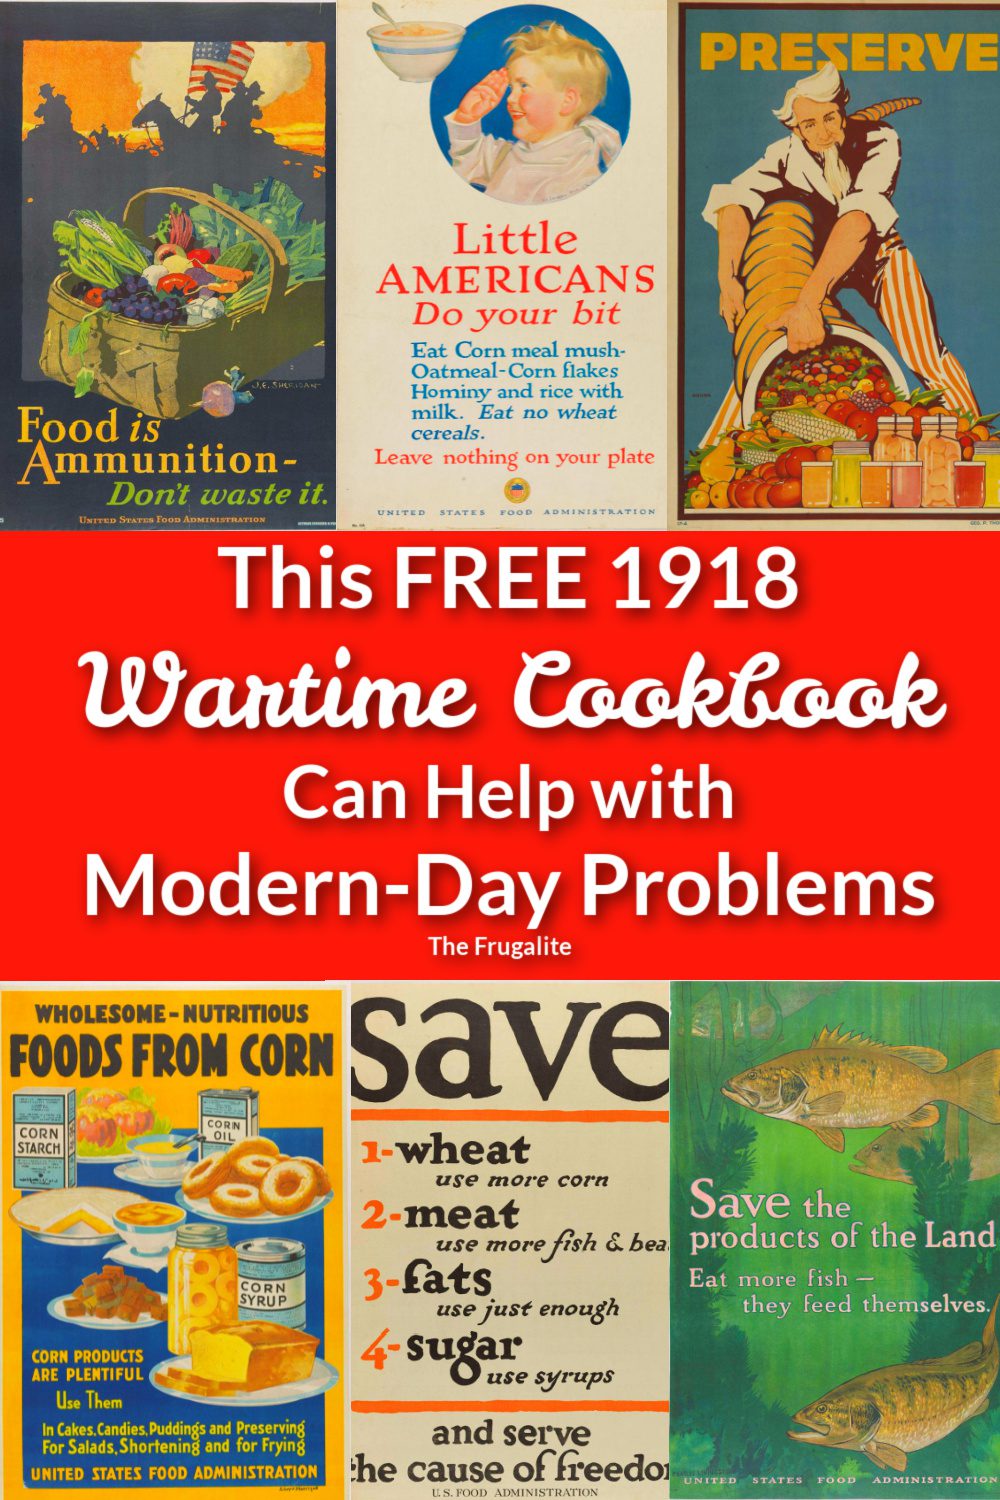 This FREE 1918 Wartime Cookbook Can Help with Modern-Day Problems